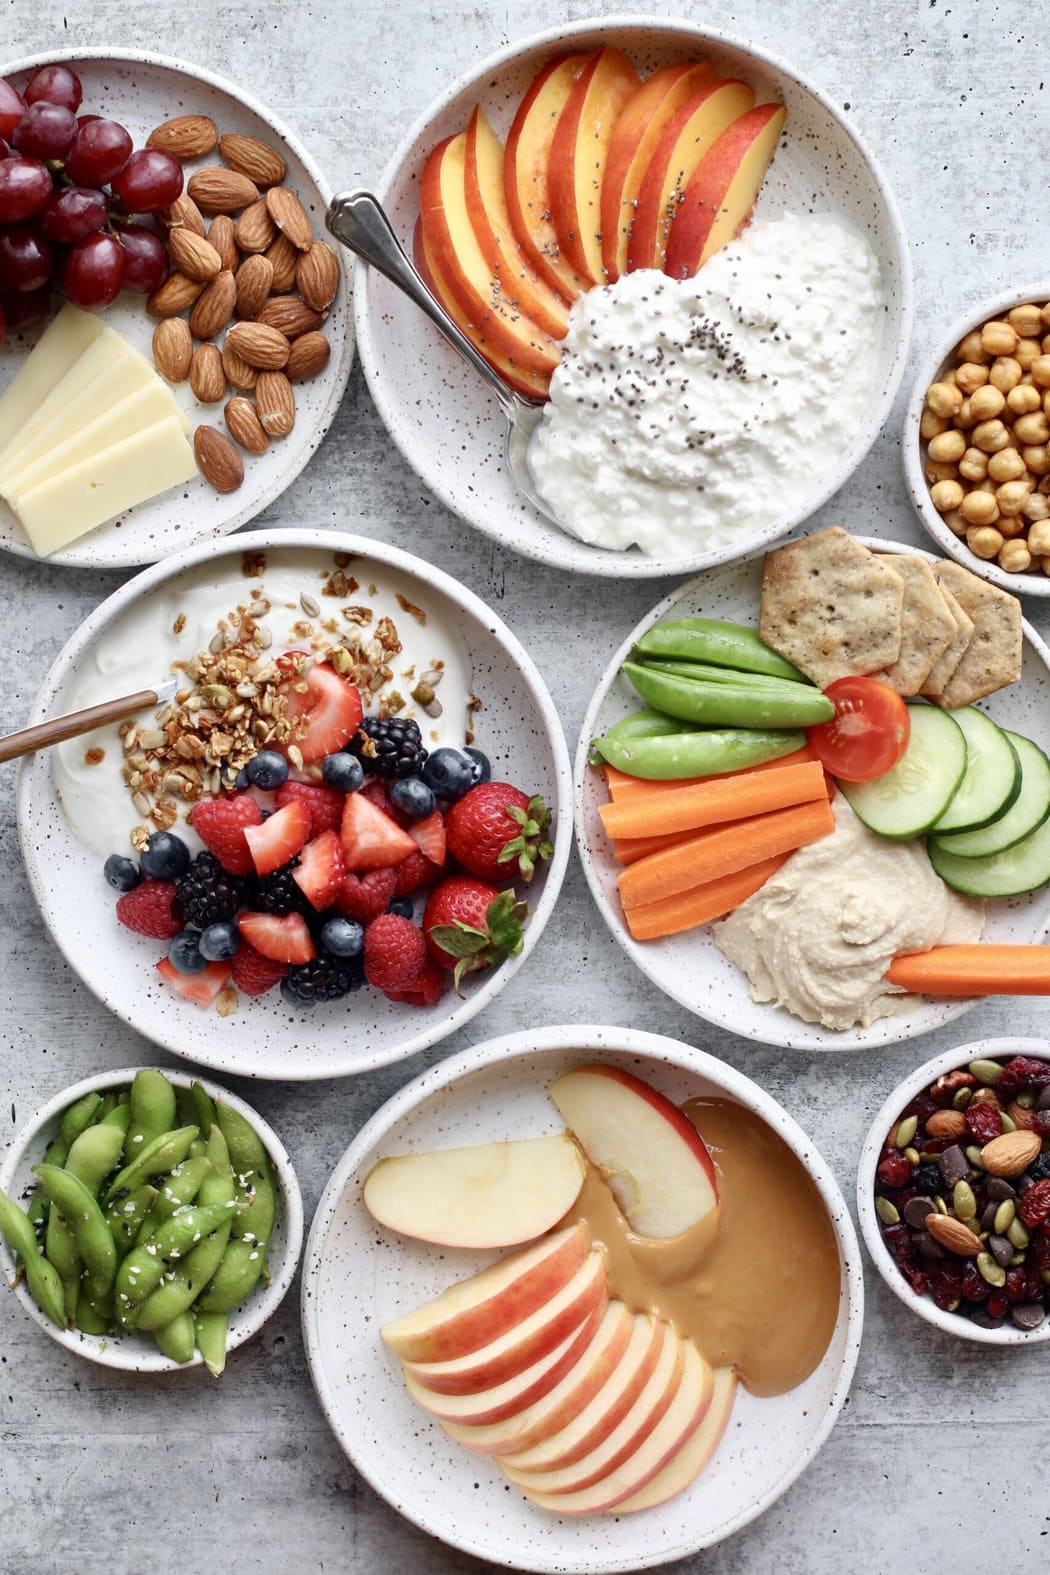 16 Healthy Snacks Anyone Can Make - The Real Food Dietitians